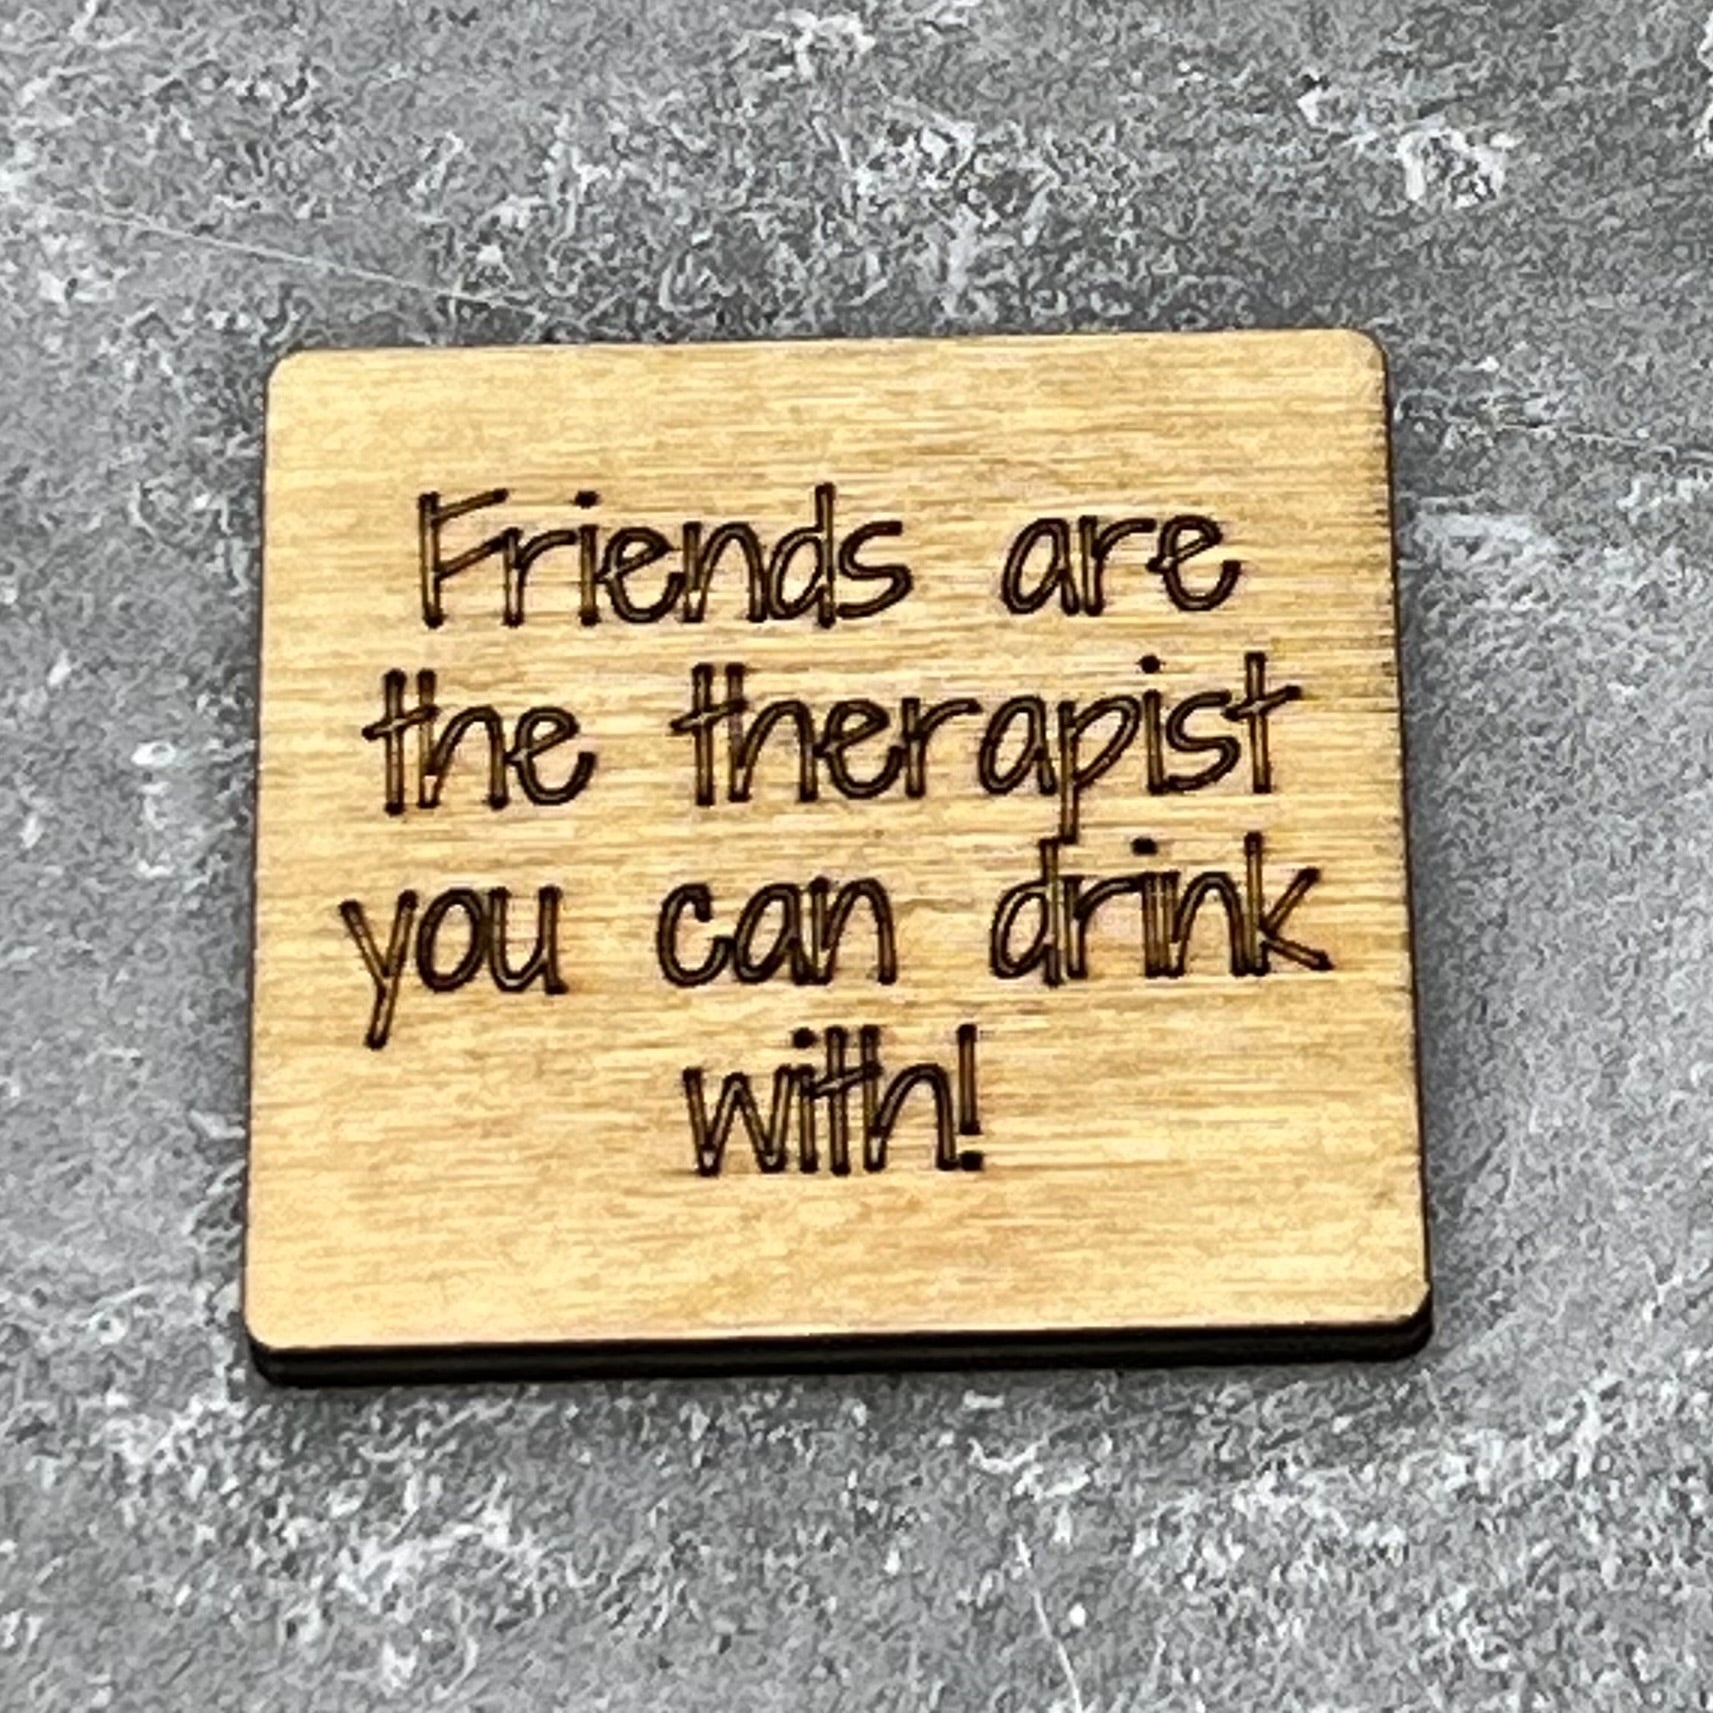 2" wood square with “Friends are the therapist you can drink with!“ laser engraved